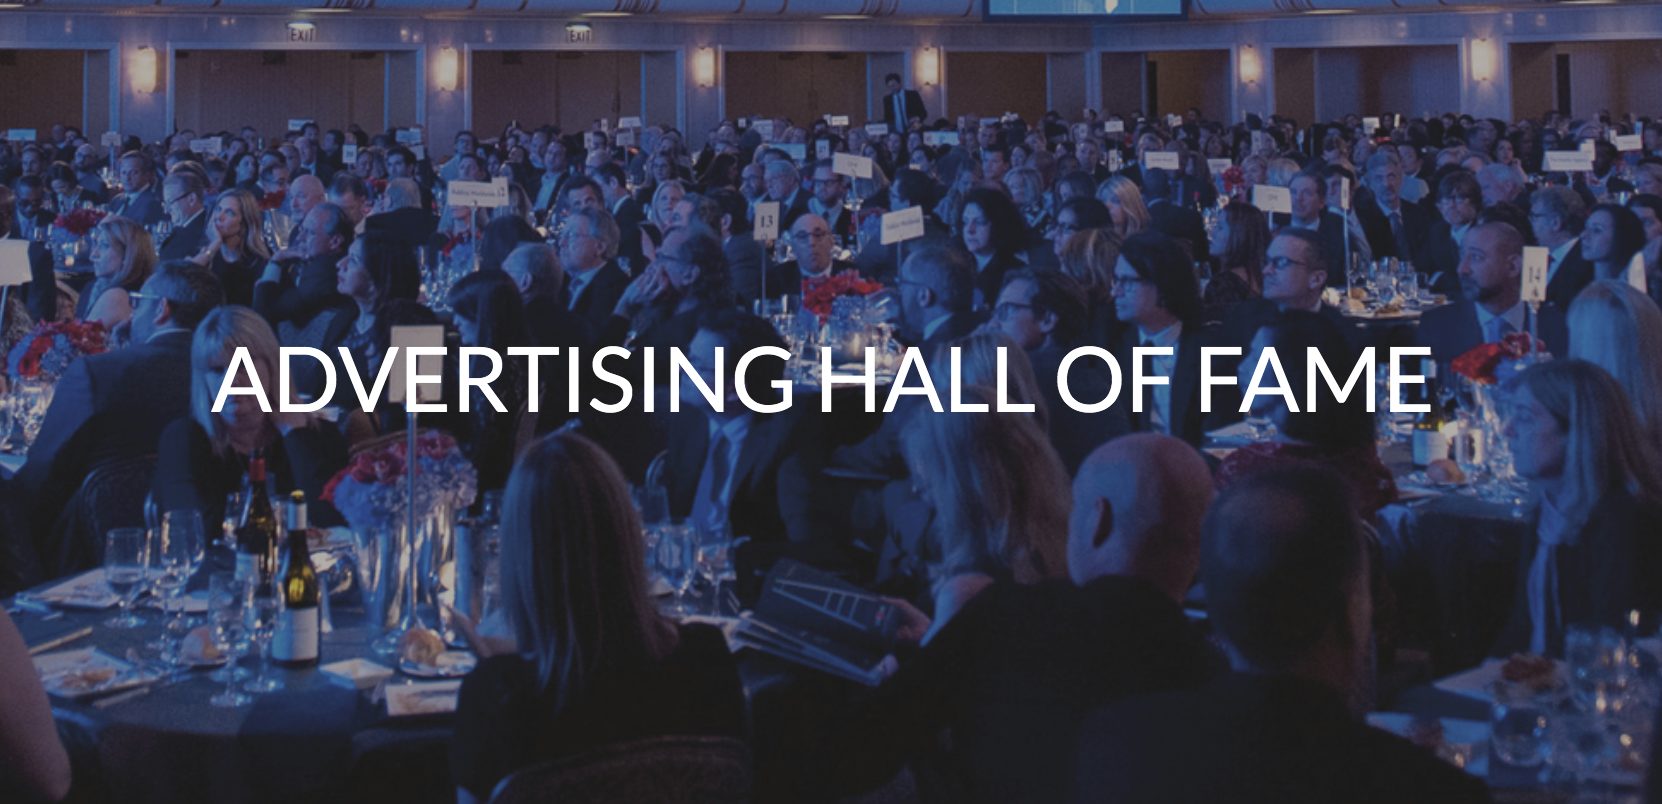 Miller/Datri Entertainment proudly sponsors the 2019 Advertising Hall of Fame